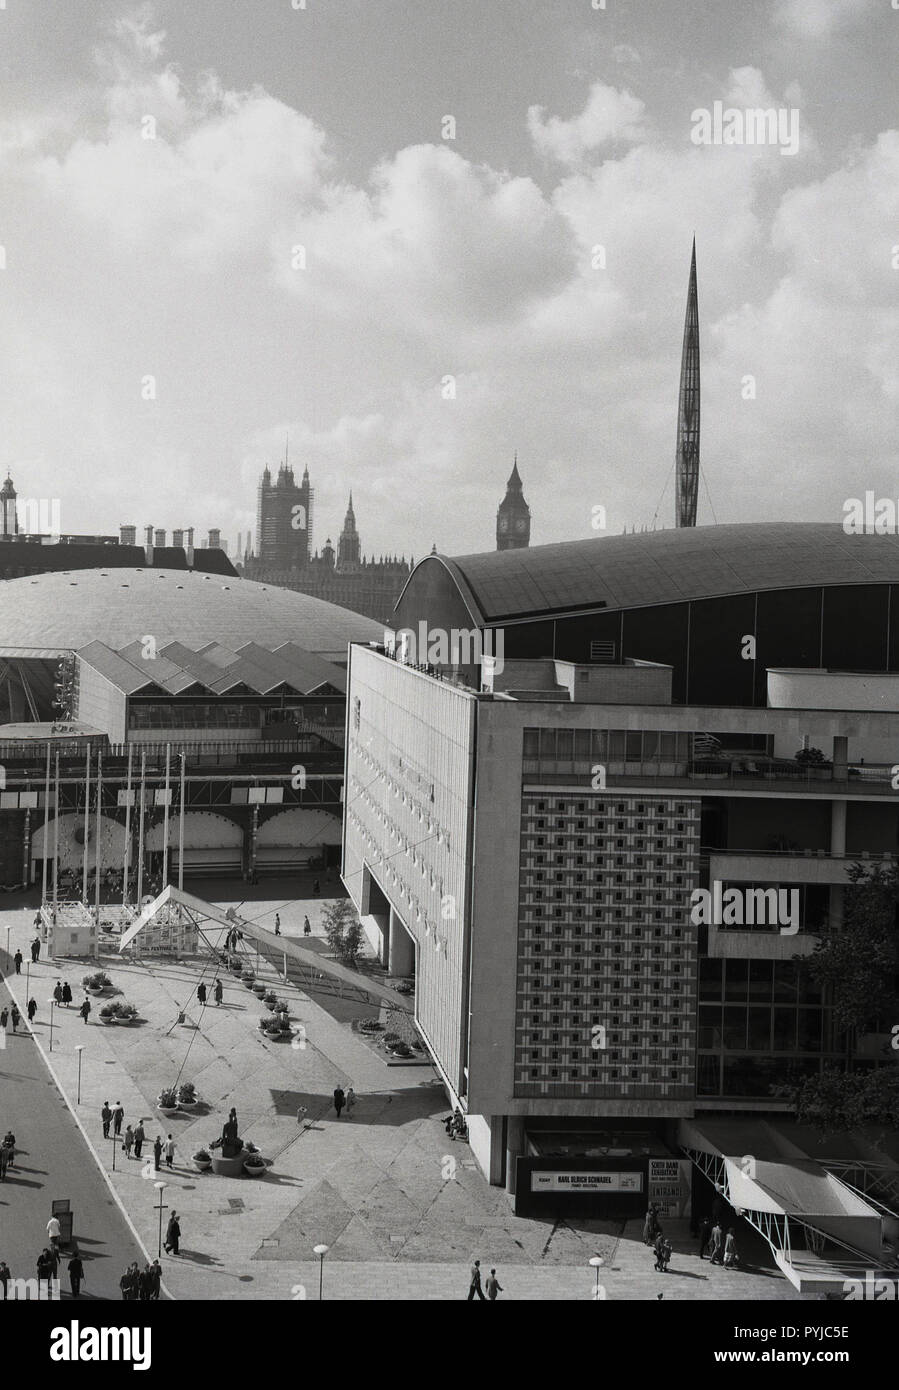 Mid-1950s, historical, overhead view of the South bank Exhibition centre, London, Royal Festival Hall, A Karl Ulrich Schnabel piano recital taking place at the venue. The British Houses of Parliament can be seen in the distance. Stock Photo